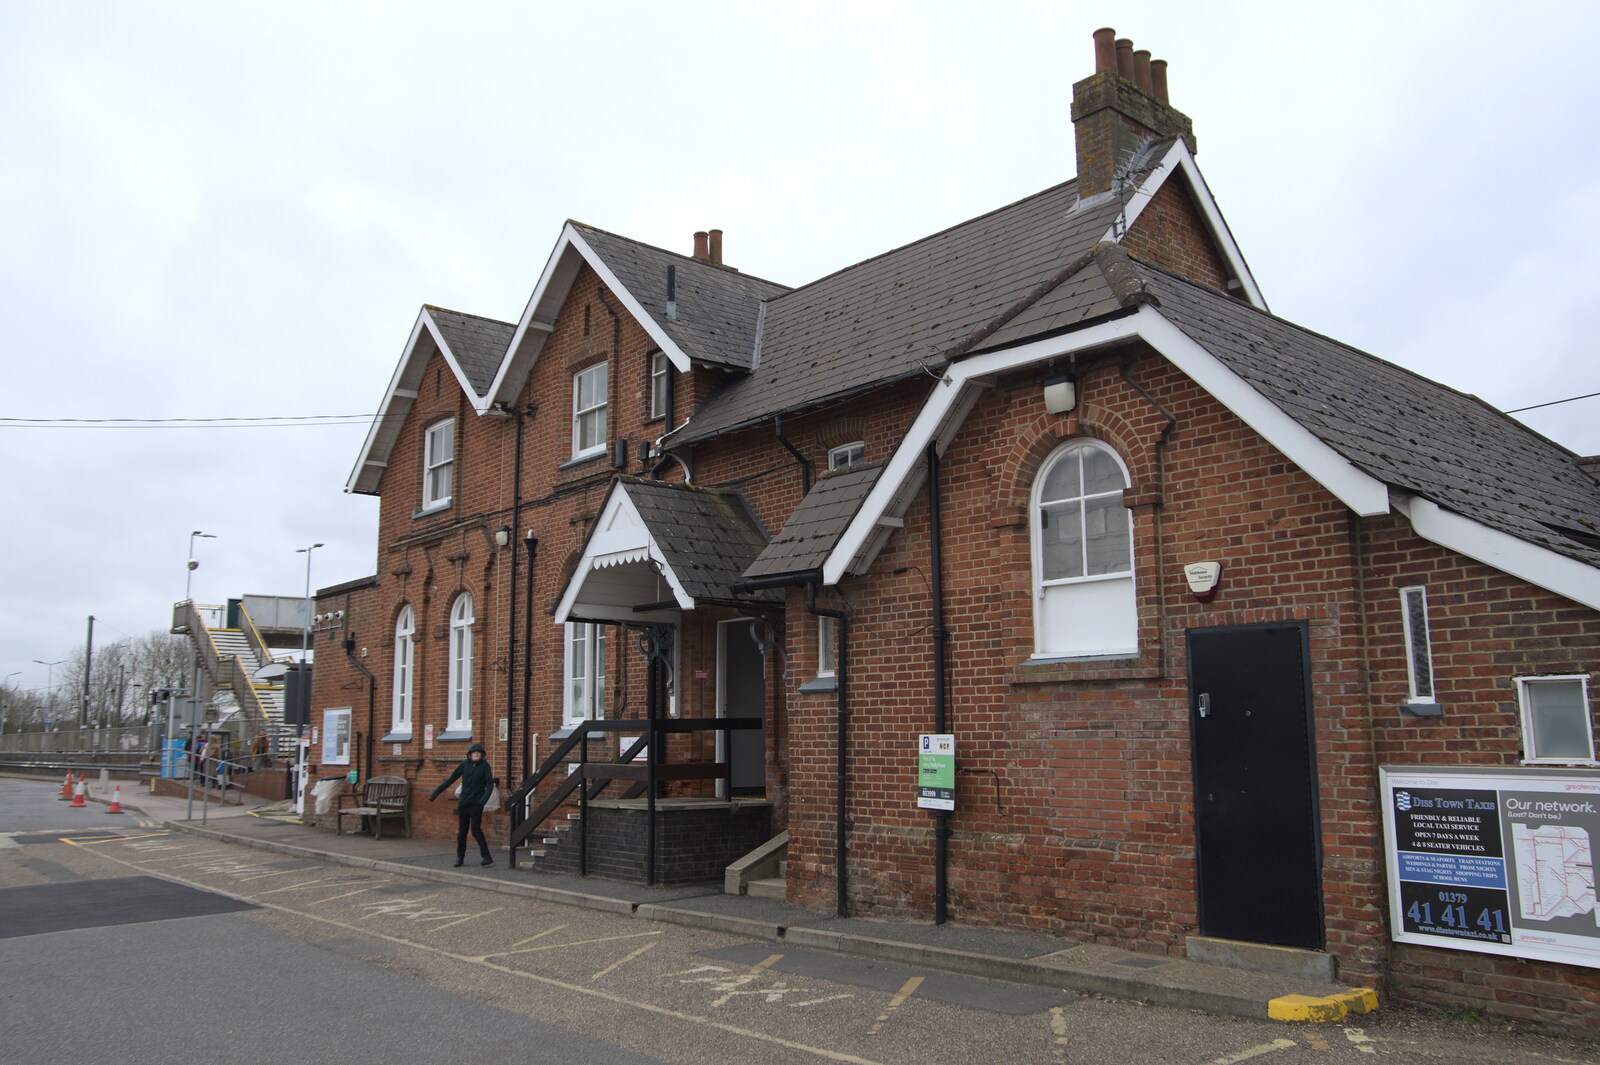 Diss Railway Station, built in 1859 from The Lost Pubs of Norwich, Norfolk - 13th February 2022